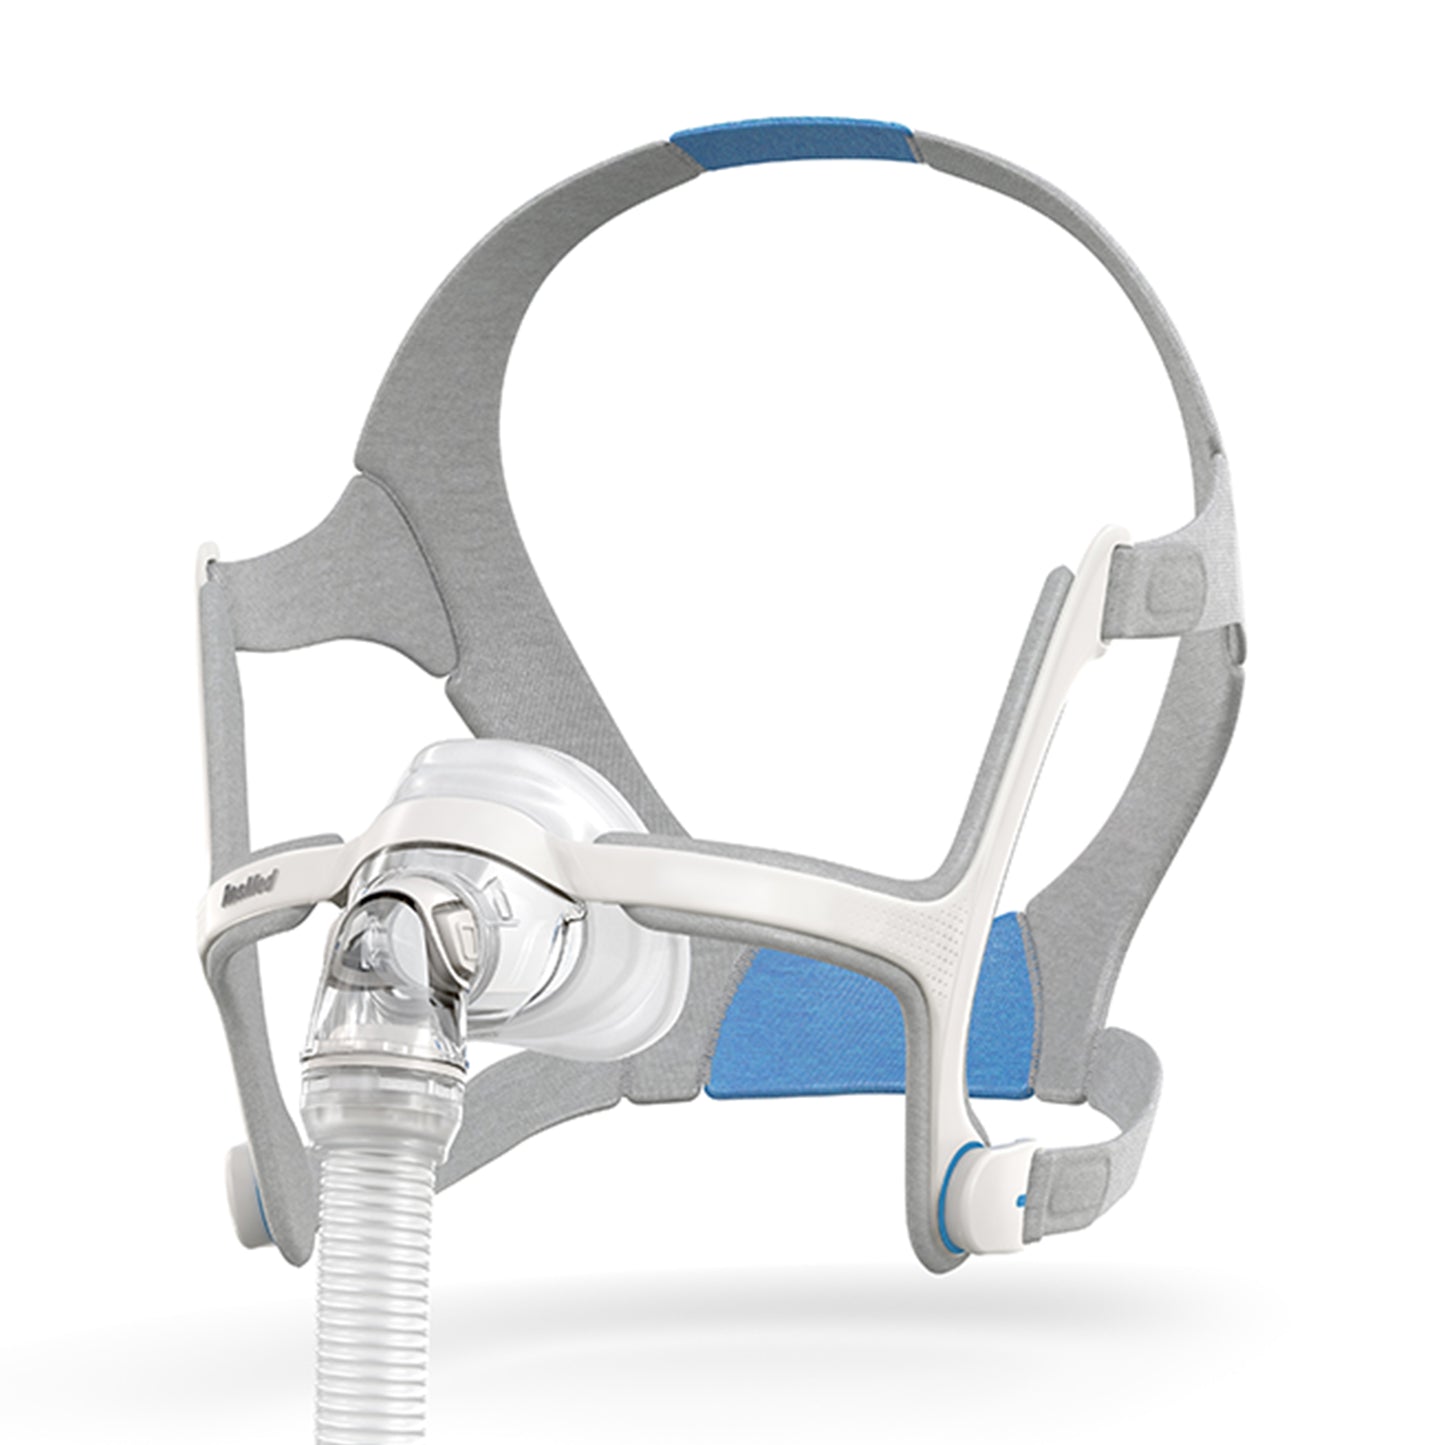 Airfit N20 Complete Mask System shown from the side